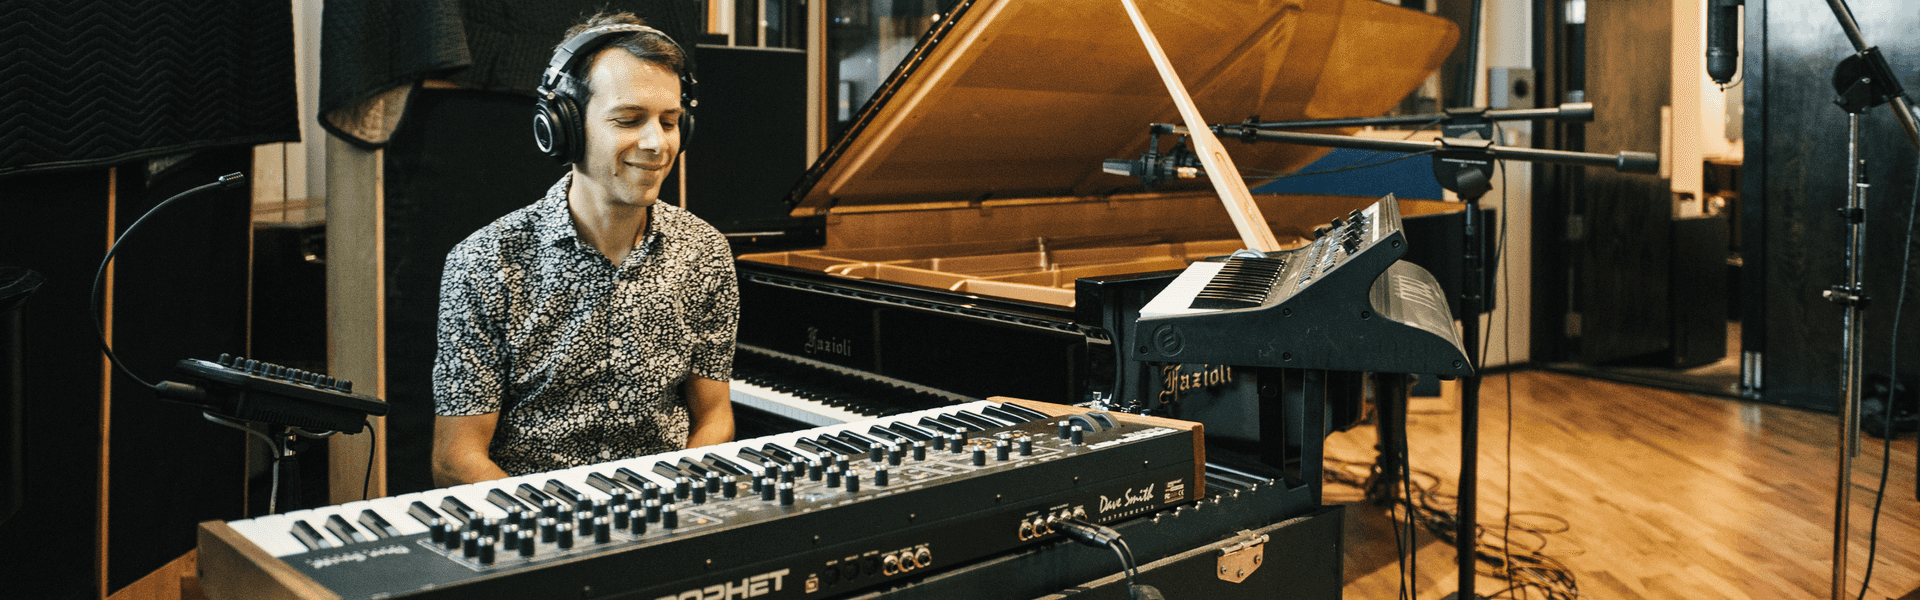 Image of musician Jesse Fischer at the Fender Rhodes in a recording studio